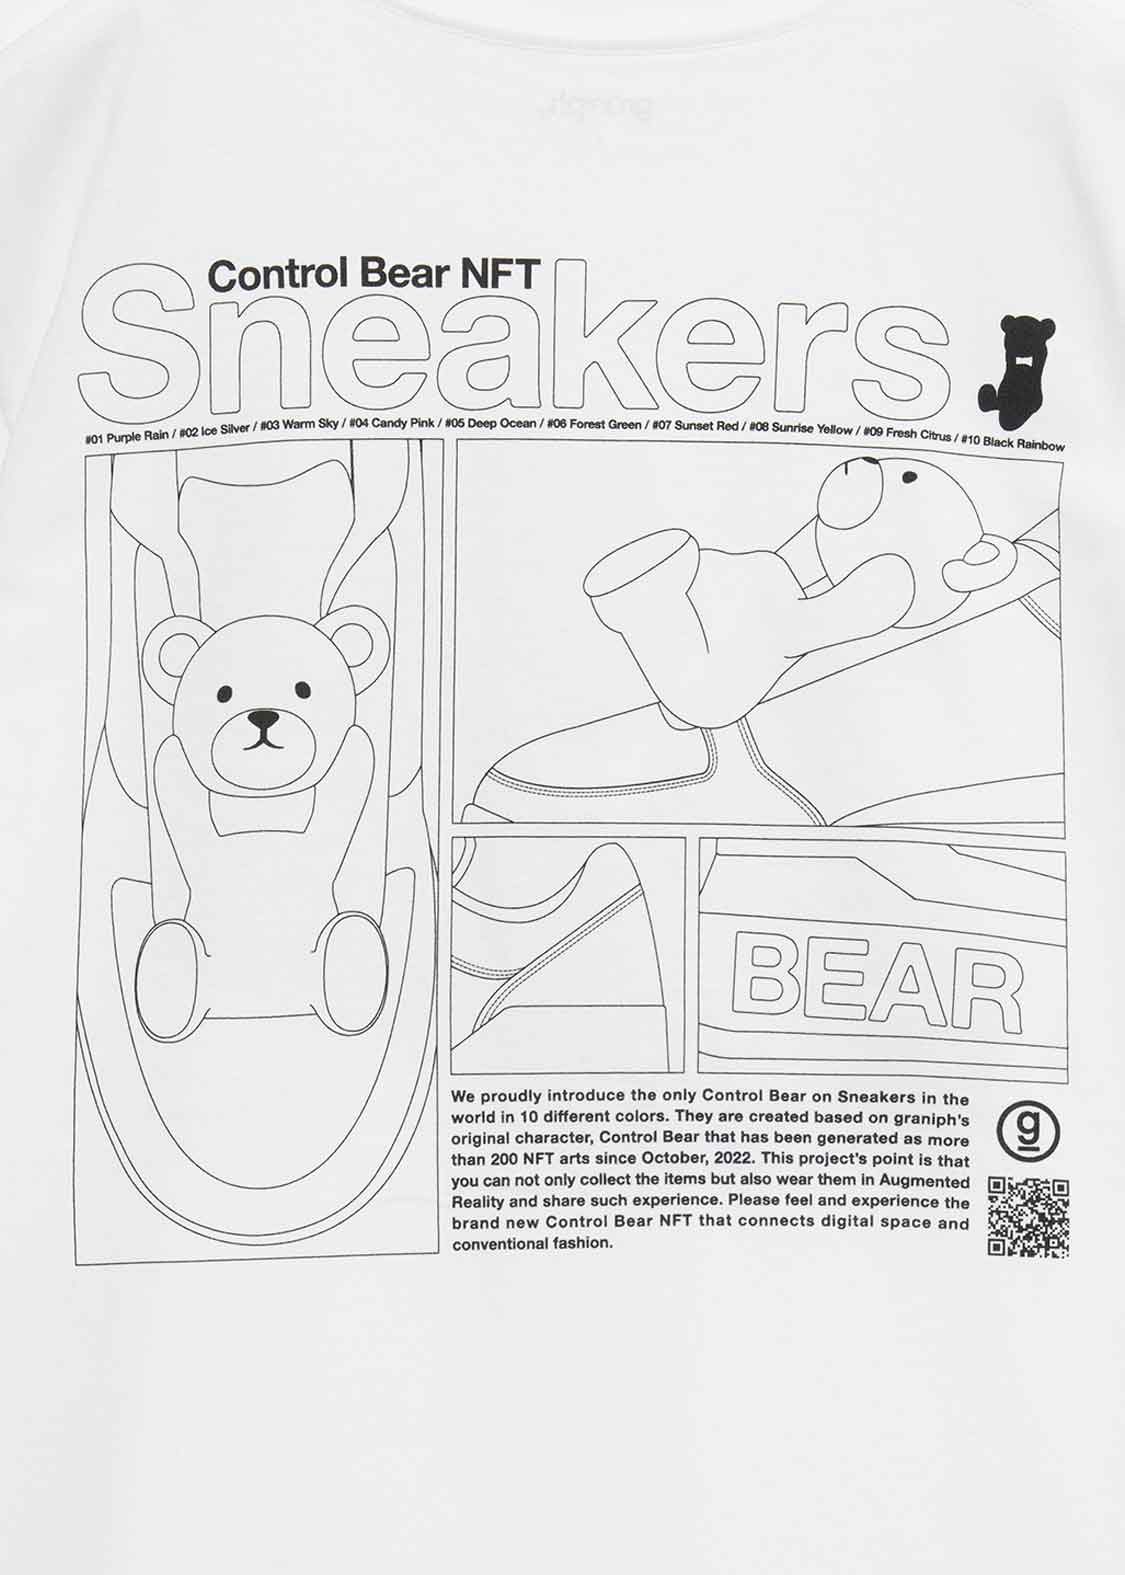 Control Bear on Sneakers